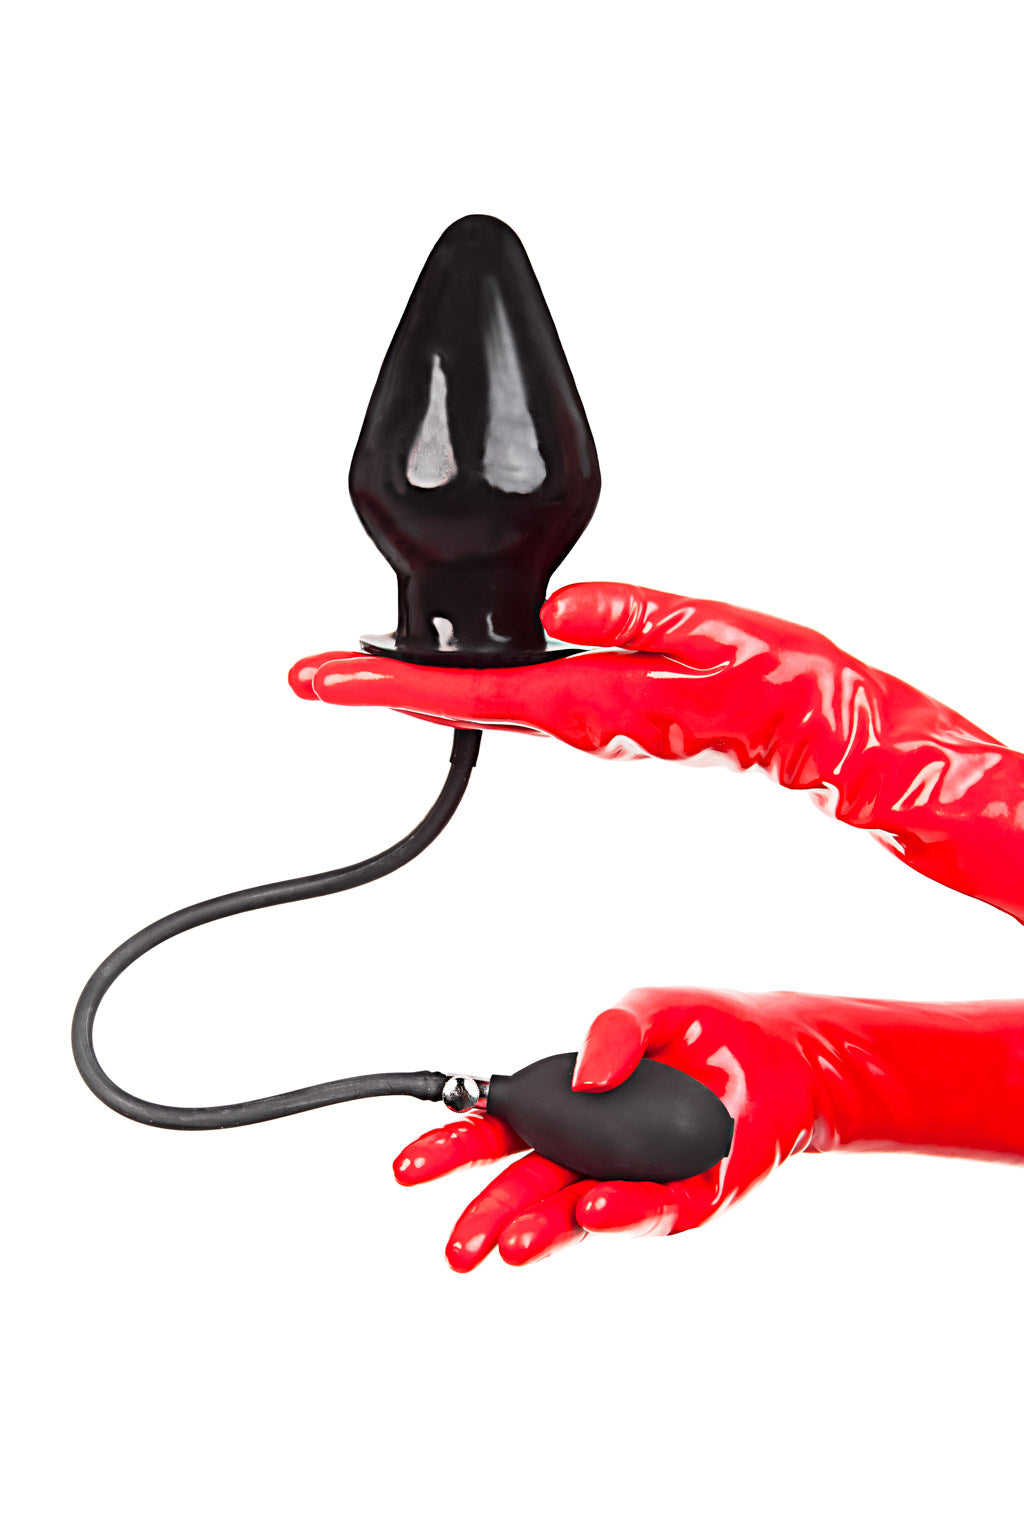 Red latex gloves holding a wide inflatable butt plug.